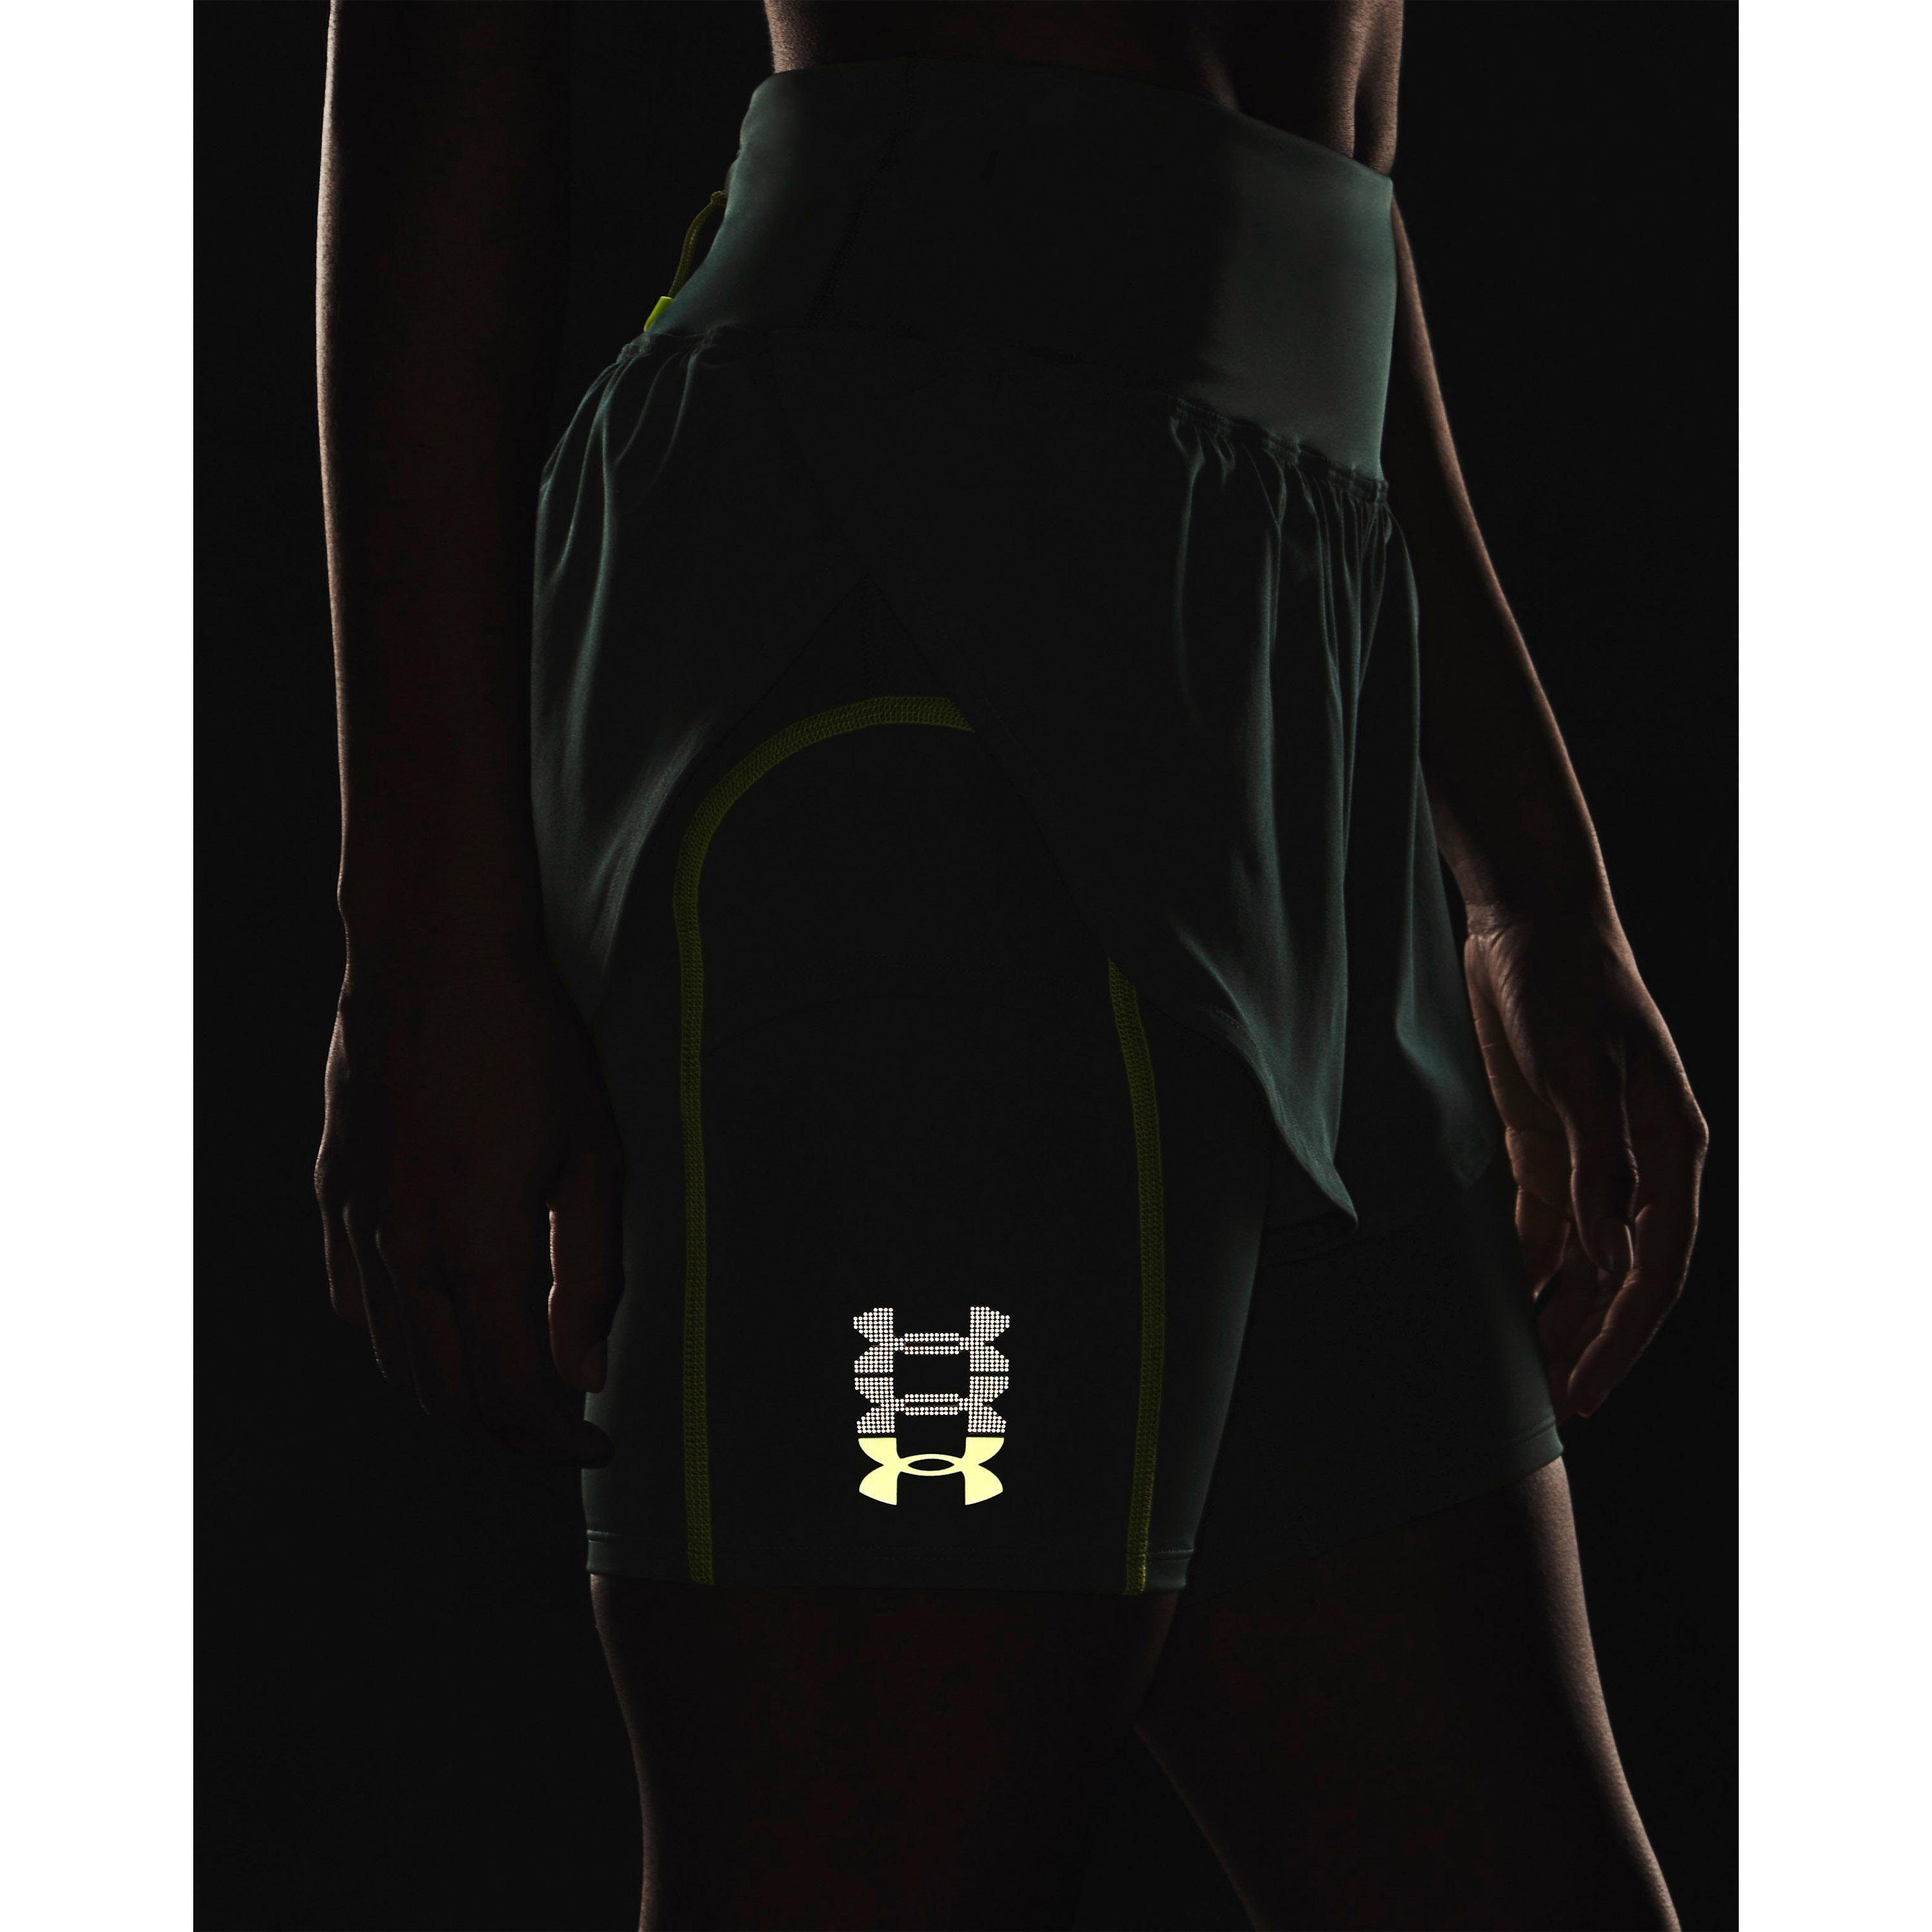 Run Anywhere Funktionshose Under Armour®